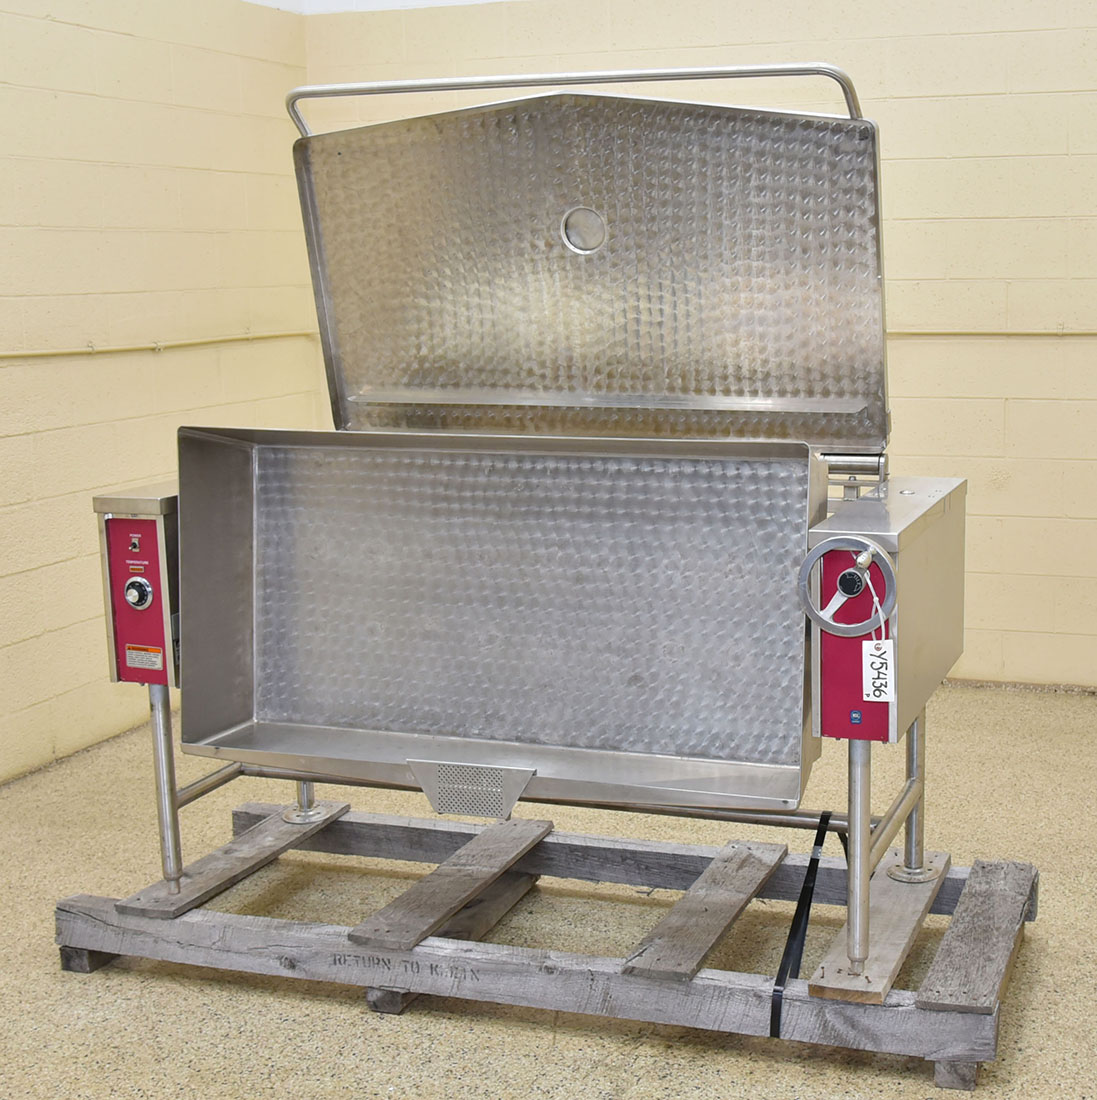 Used 40 gallon BRAISING PAN, tilt skillet, electric,  in stock, excellent condition, Alard item Y5436